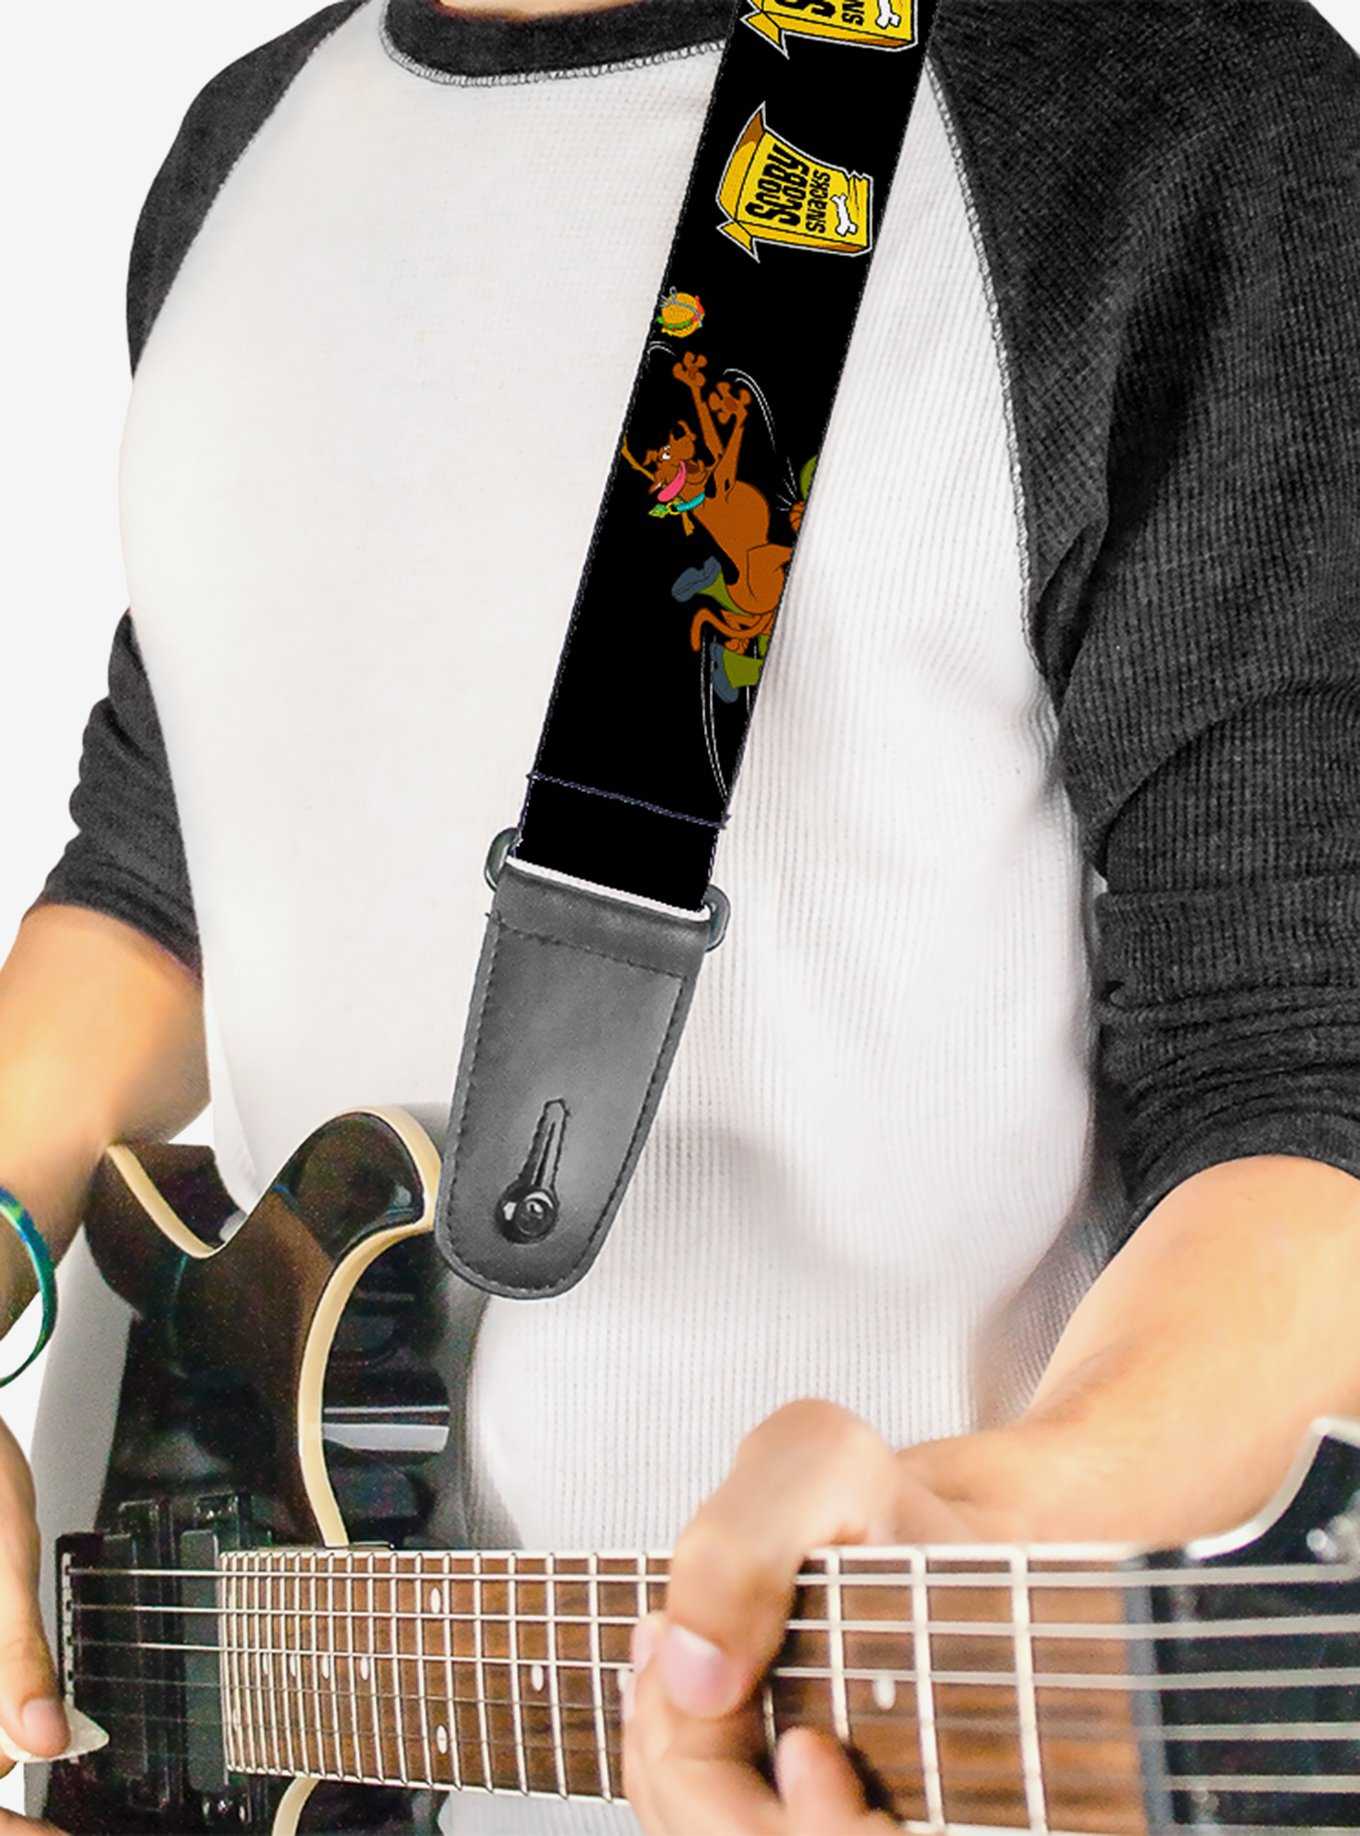 Scooby-Doo Chasing Scooby Snacks Guitar Strap, , hi-res